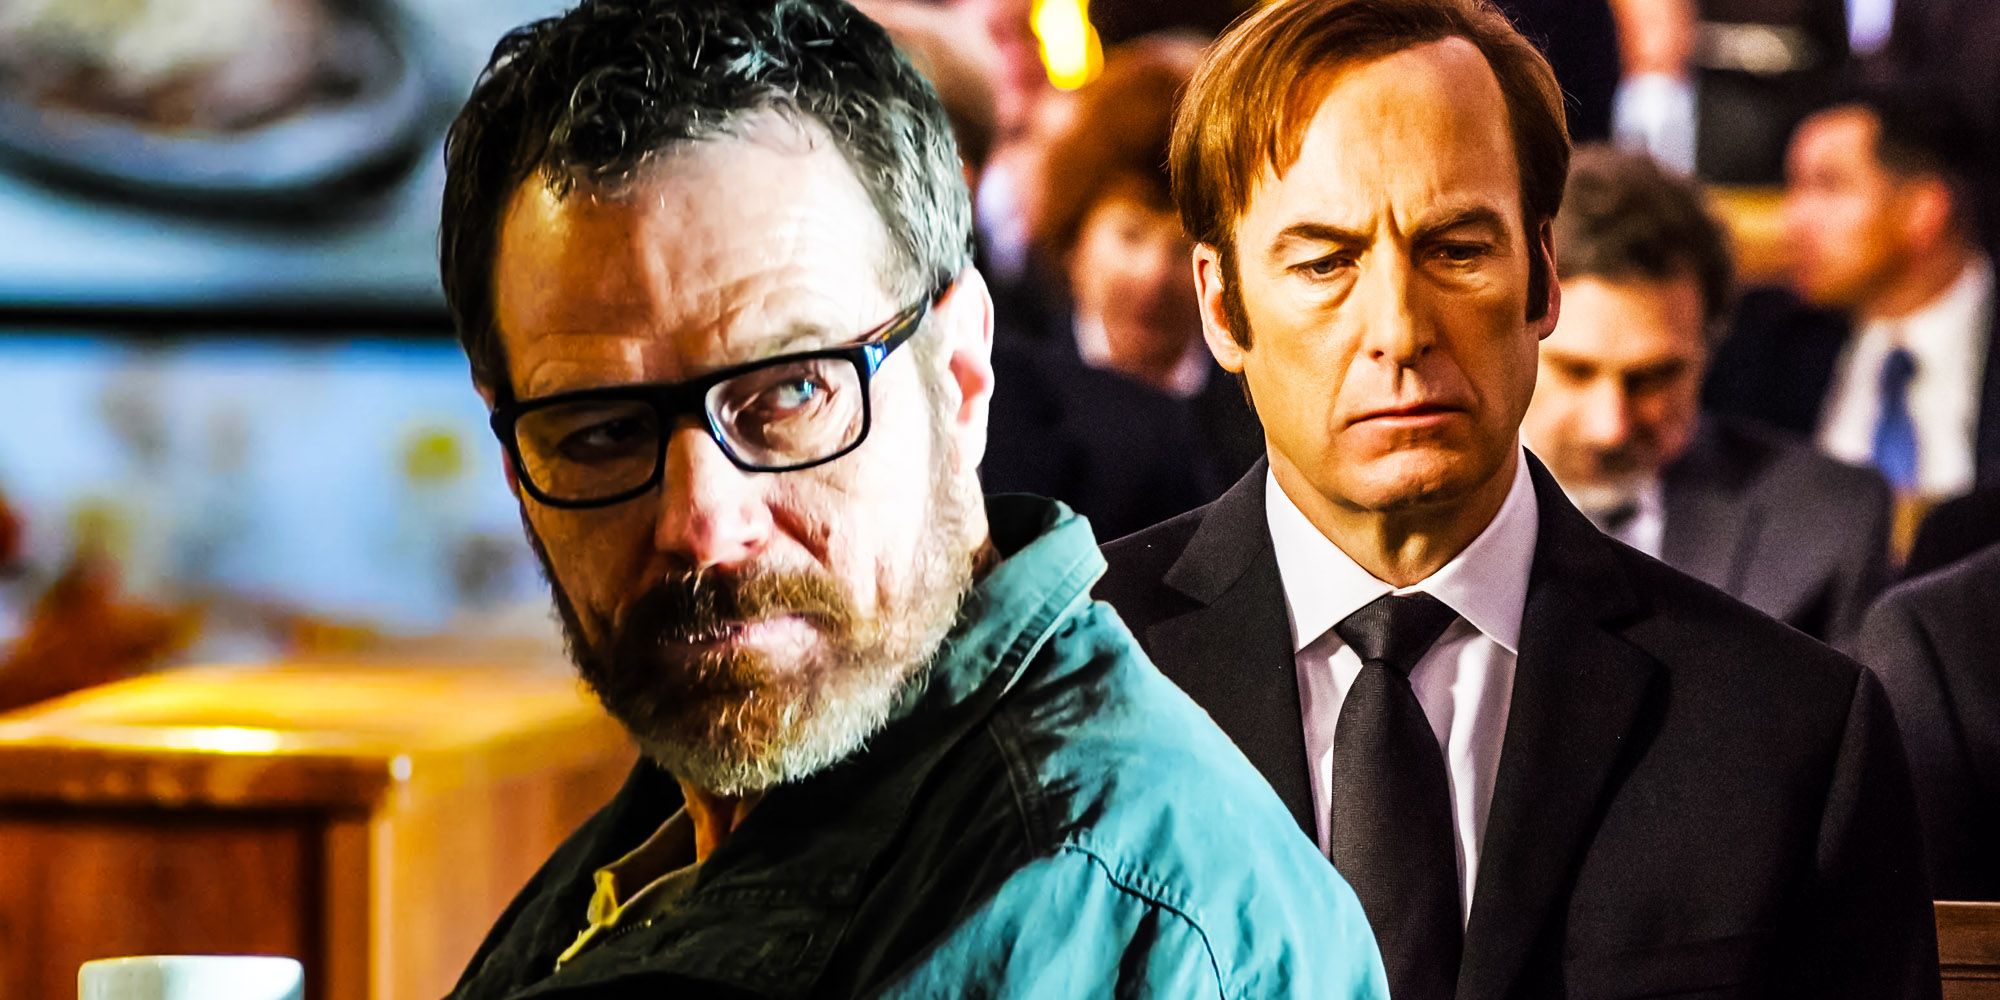 Breaking bad's walter white and Better Call Saul's Jimmy